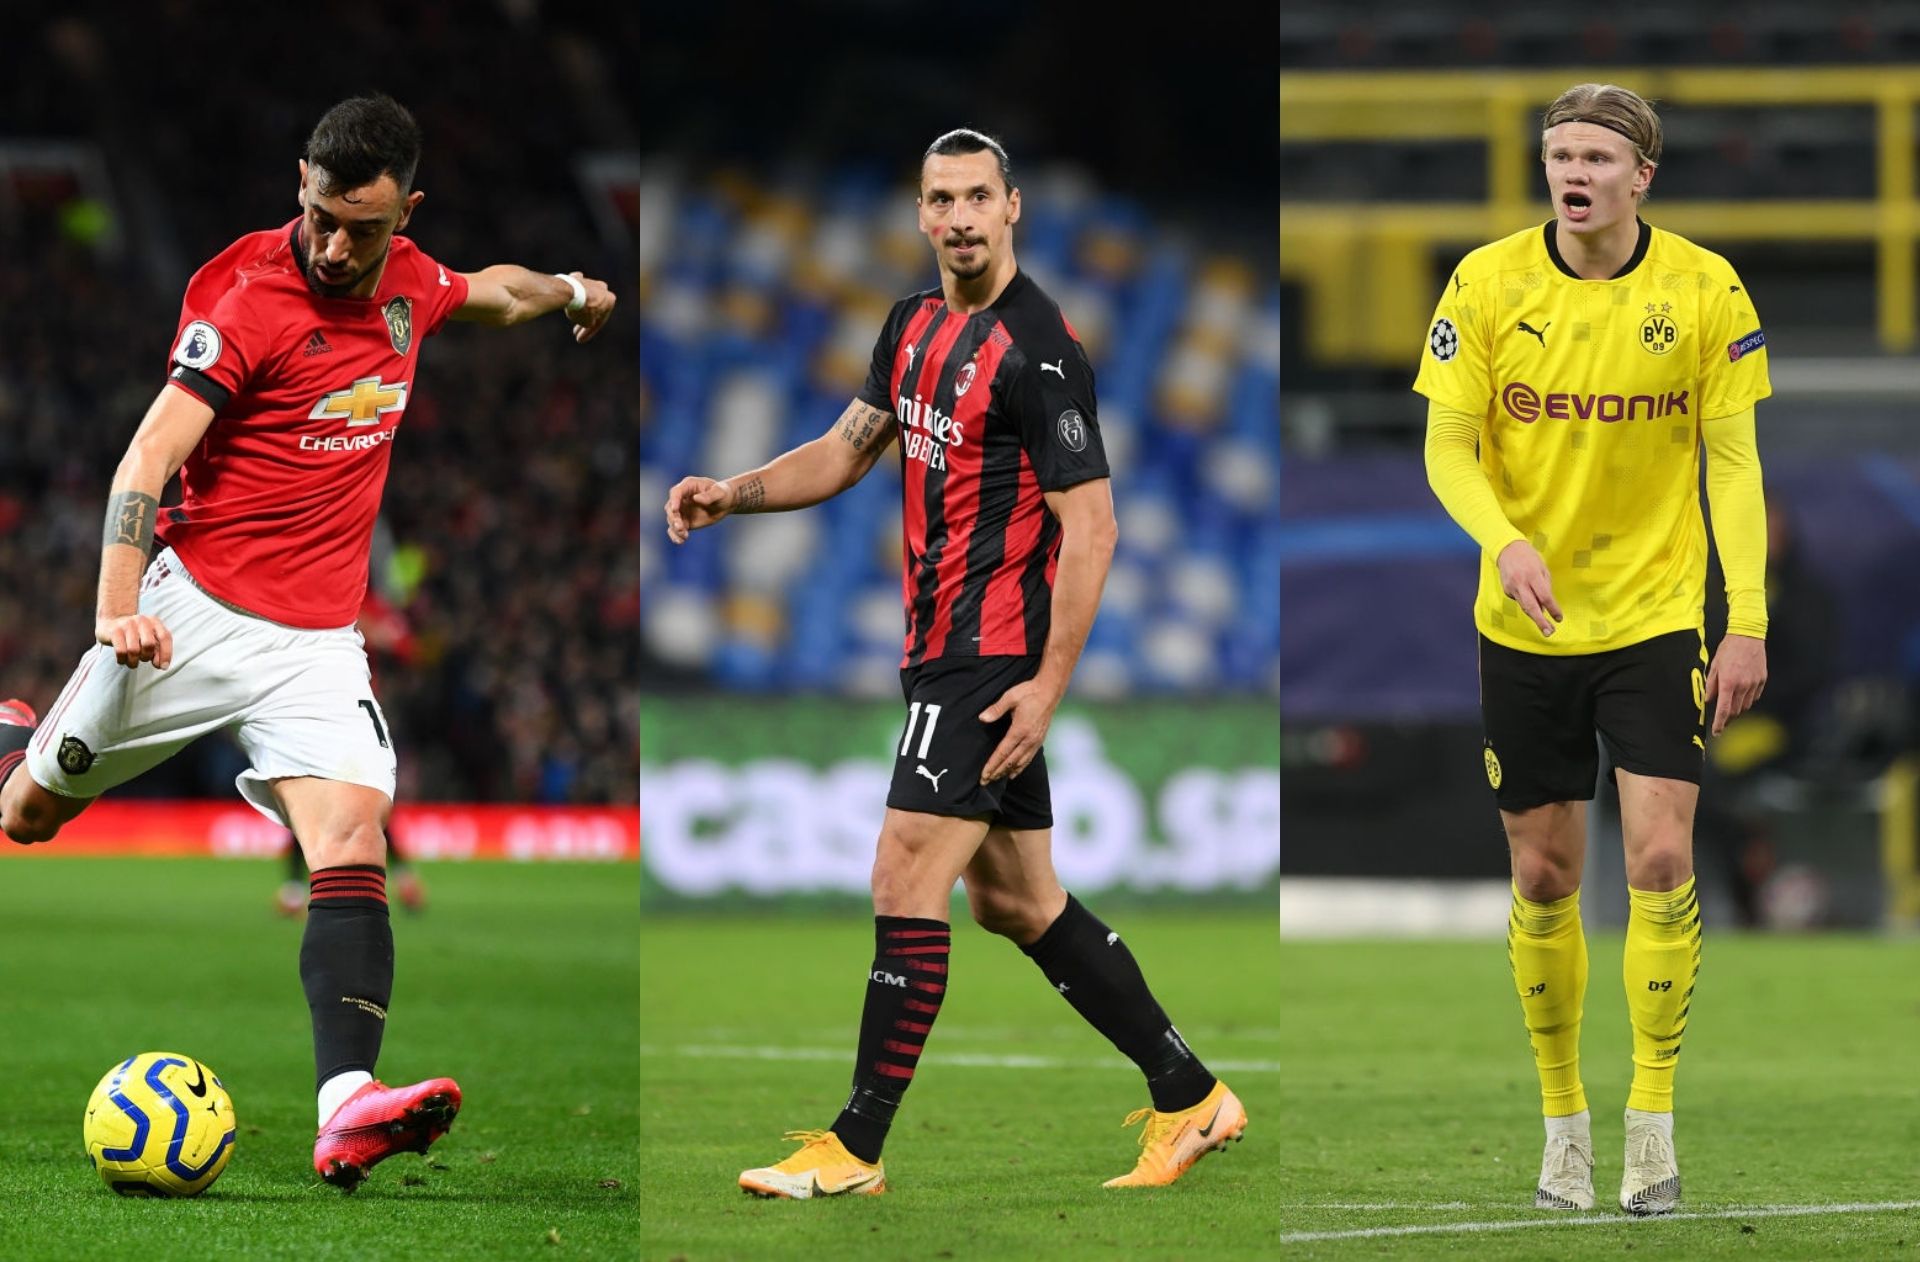 The Top 5 transfers of 2020 in European football